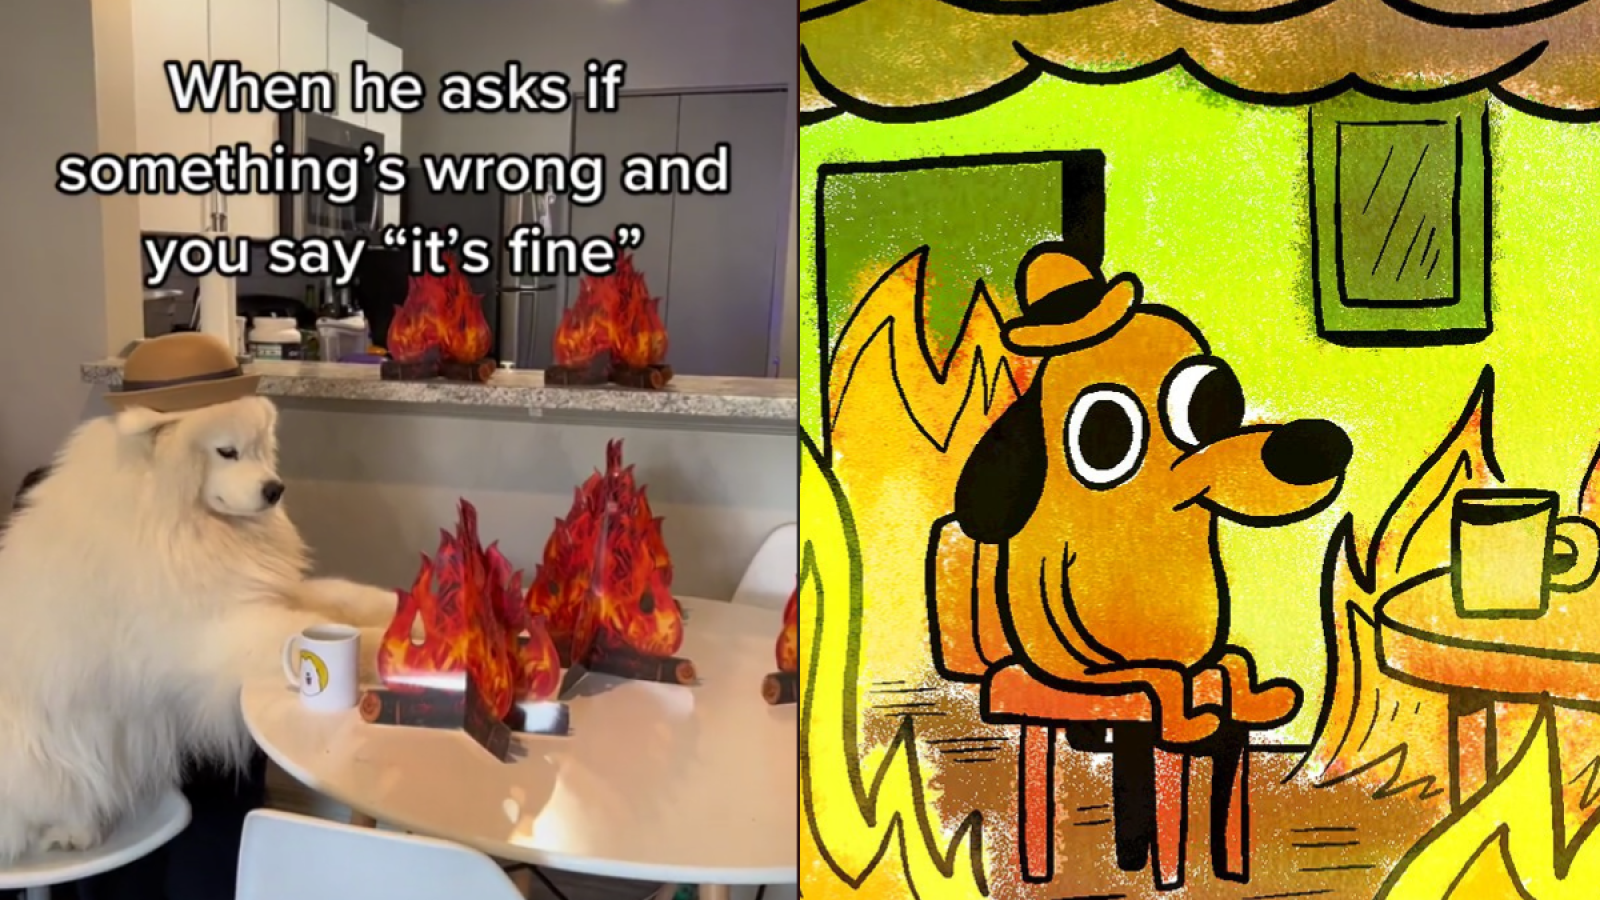 This Is Fine creator explains the timelessness of his meme - The Verge